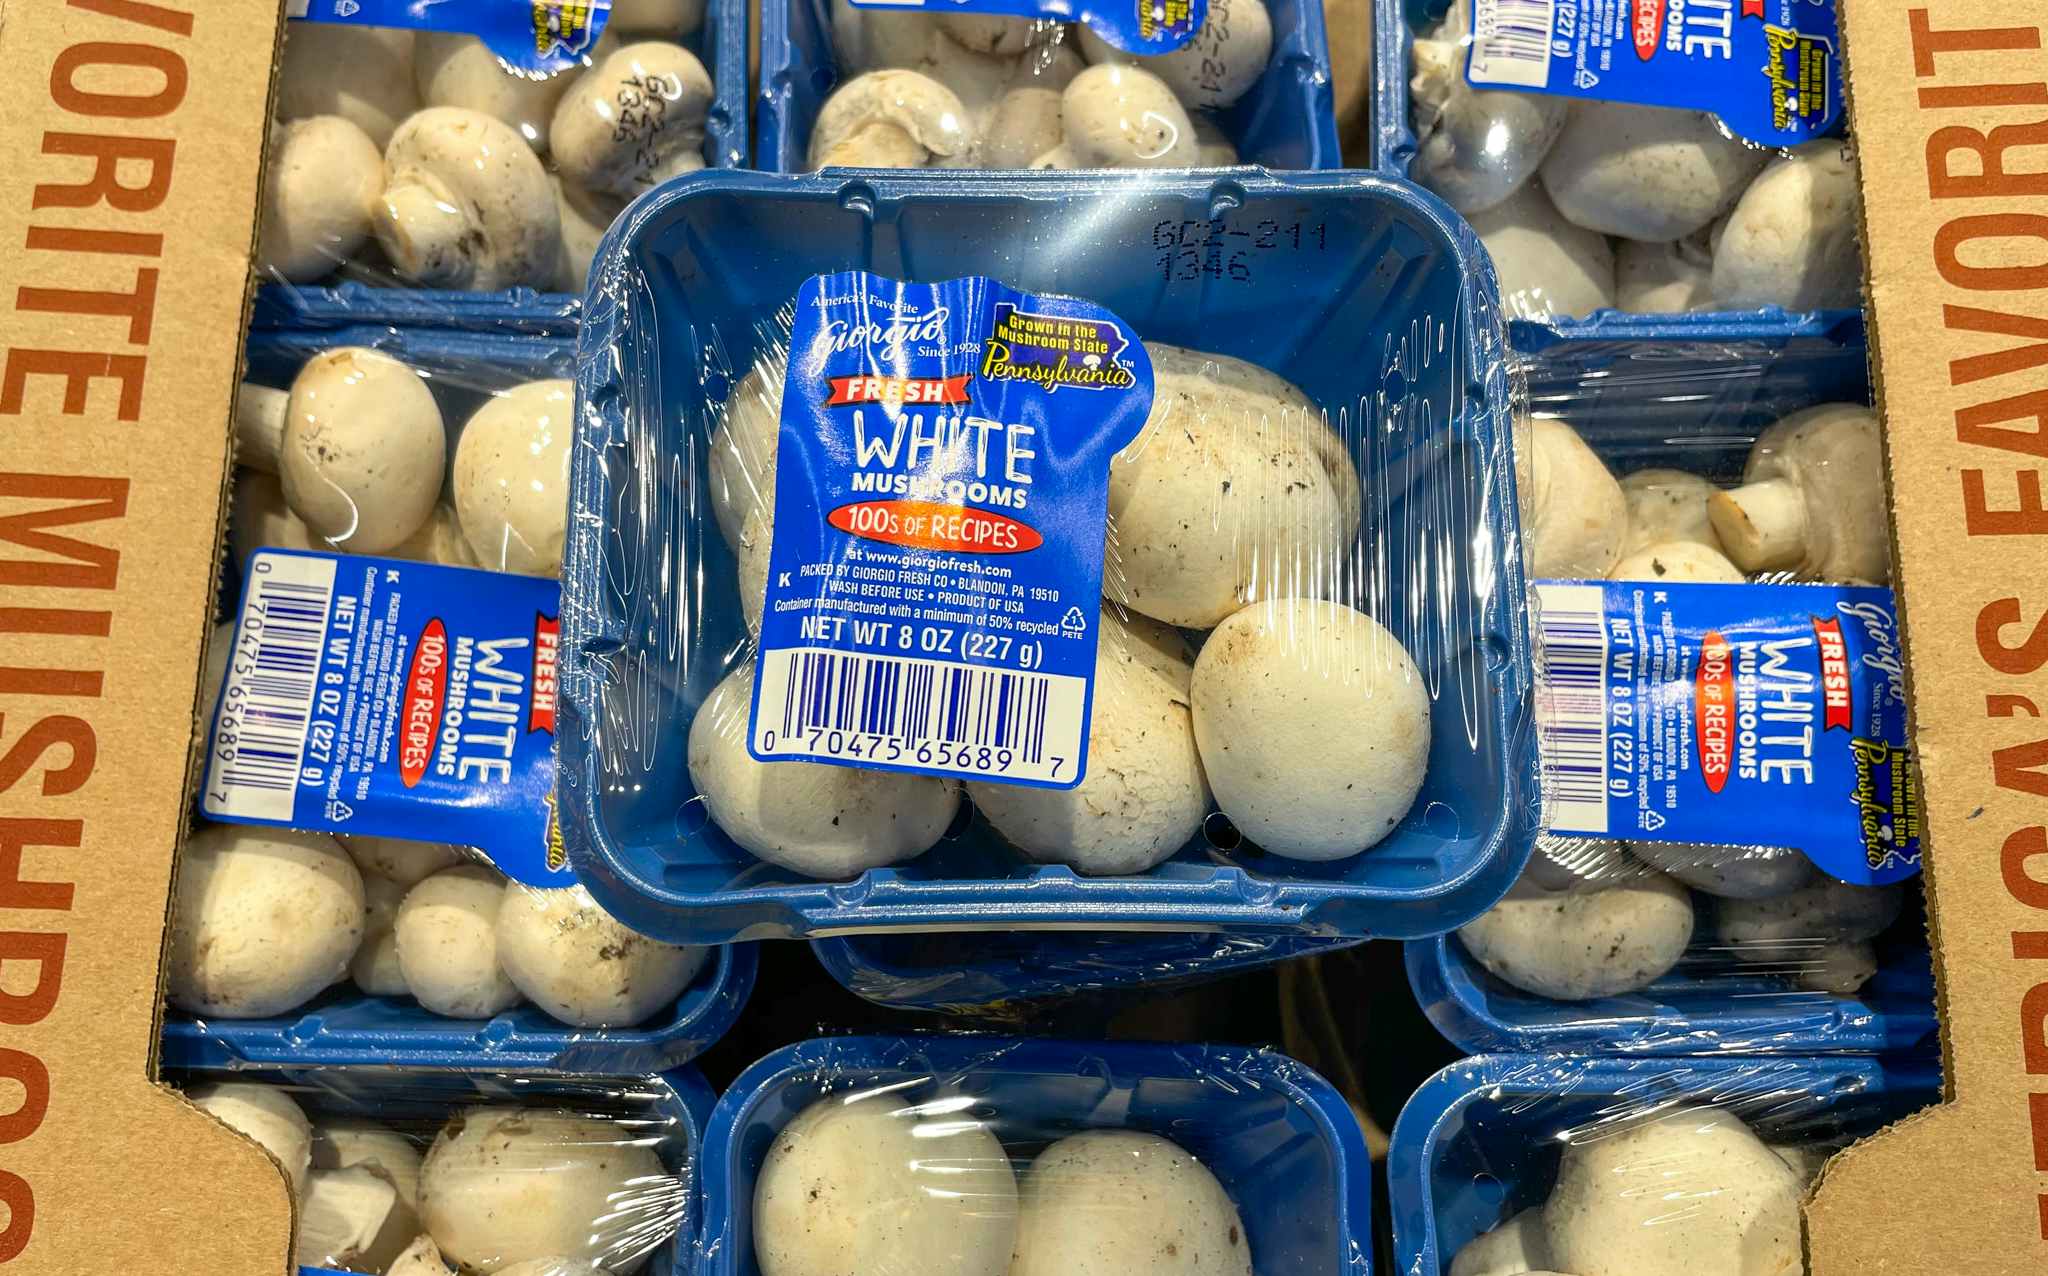 white mushrooms in a package at aldi